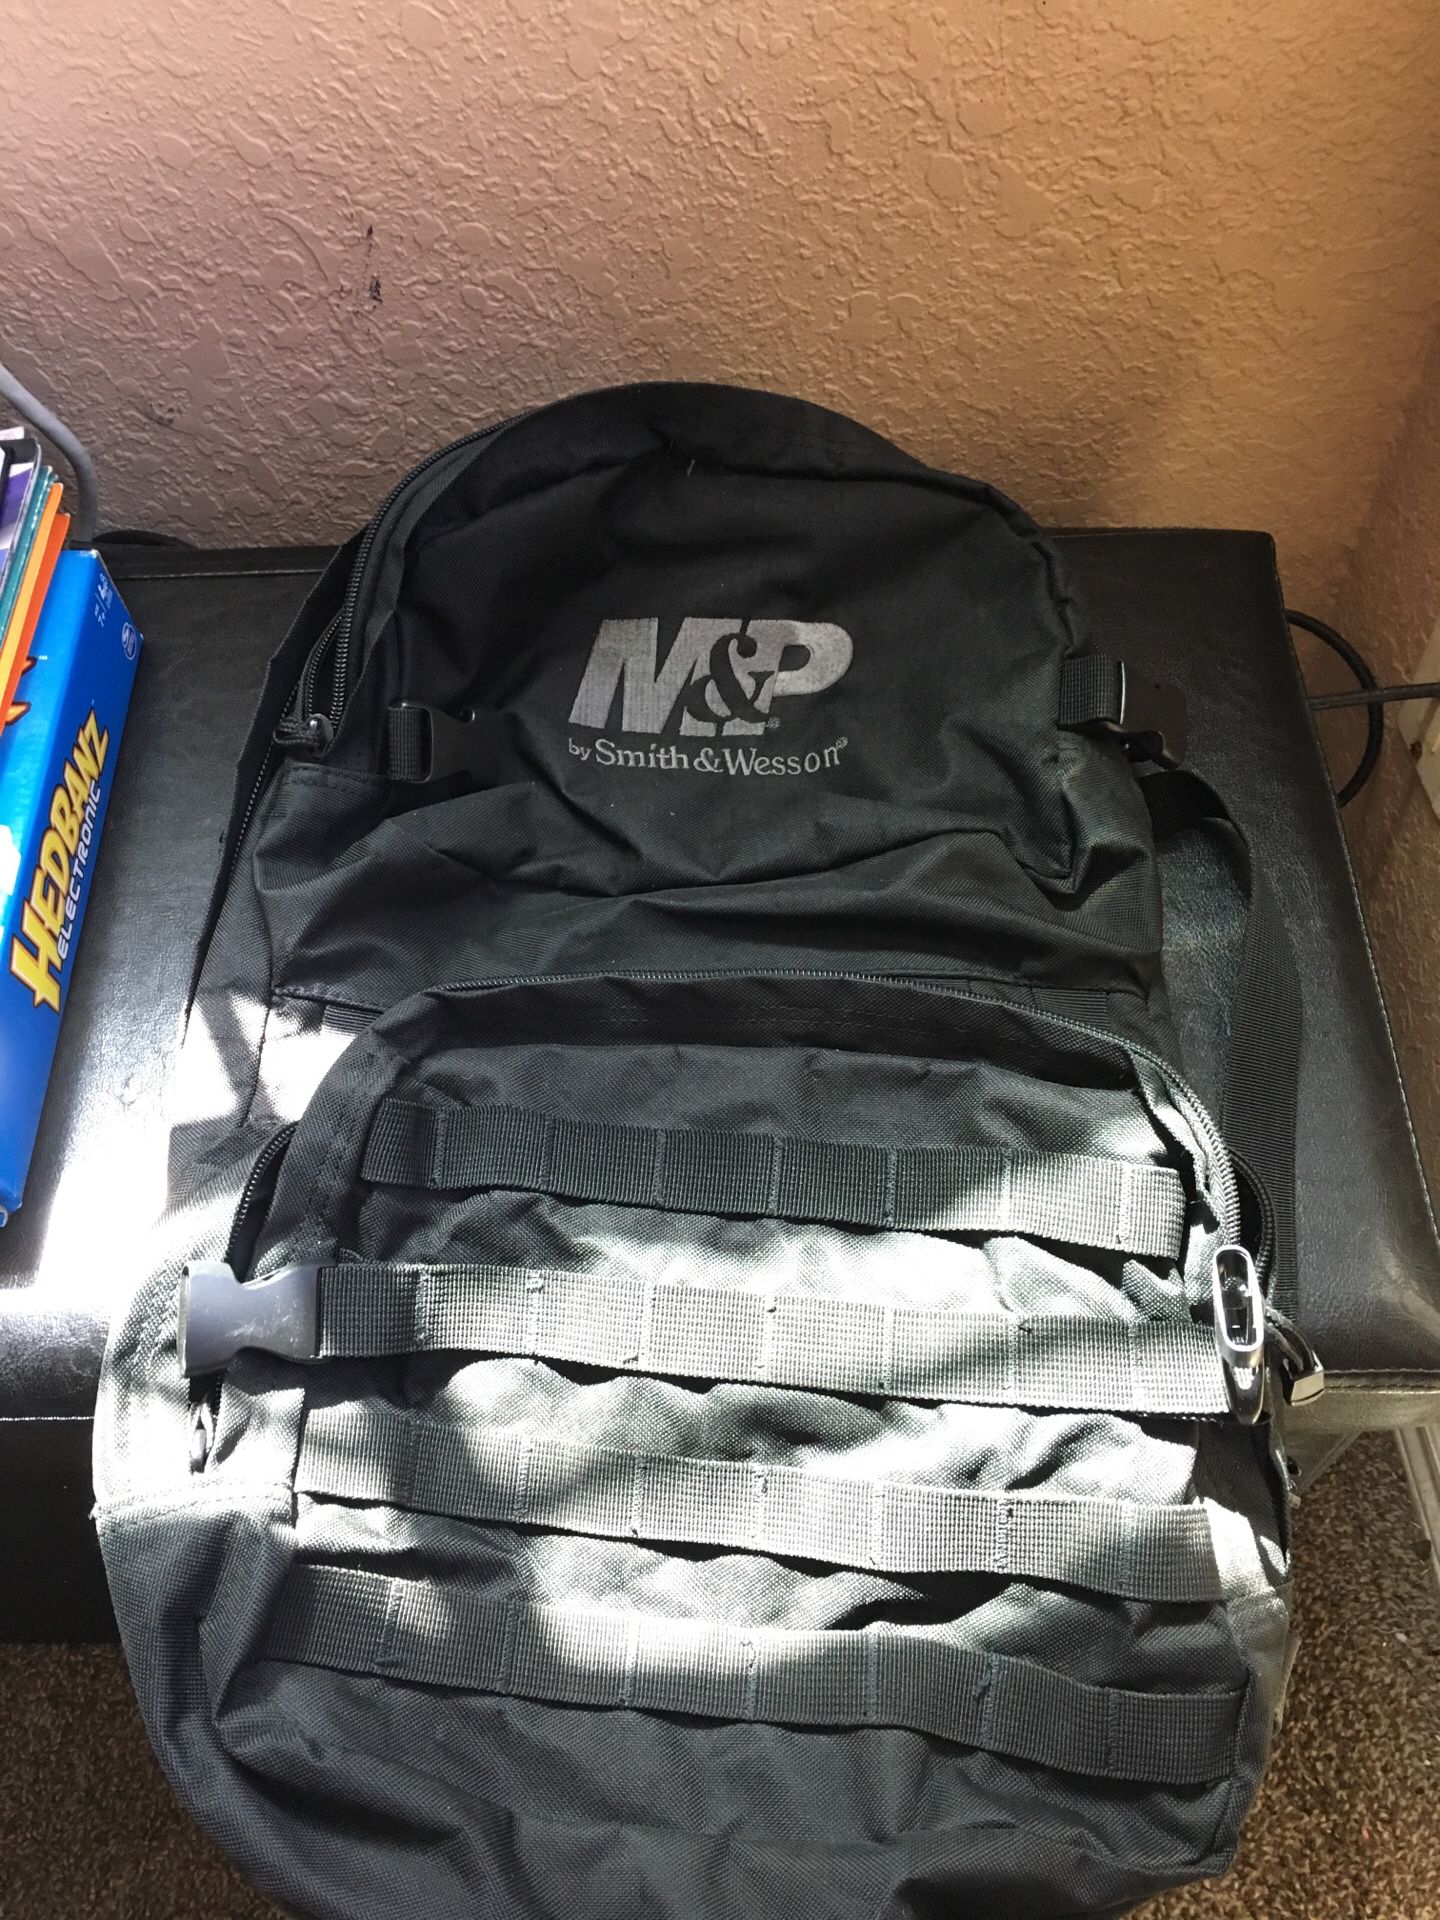 M&P by Smith&Wesson hiking backpack